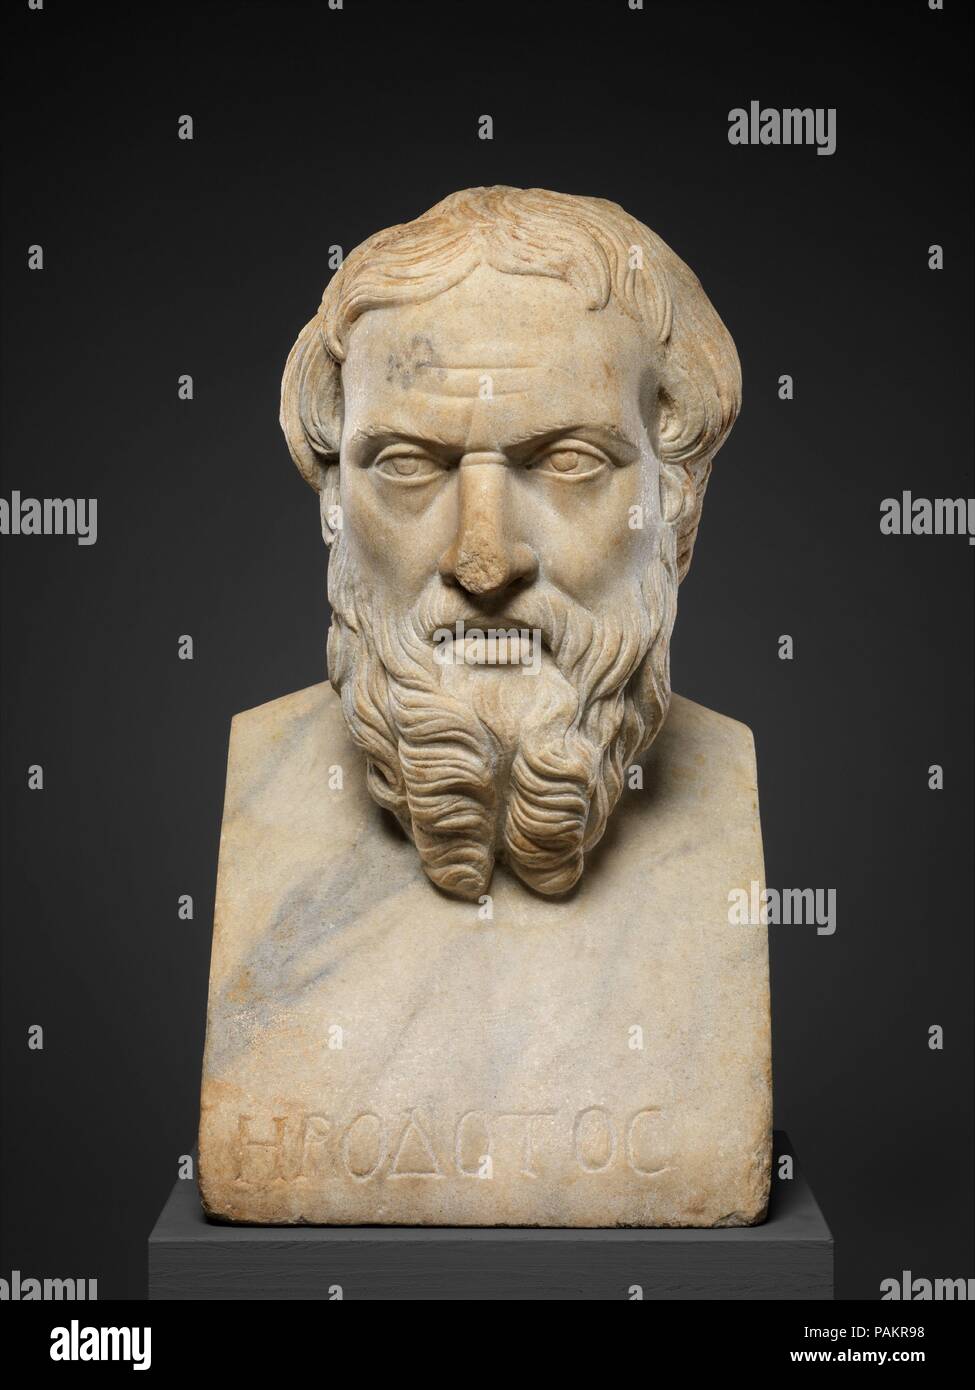 Marble bust of Herodotos. Culture: Roman. Dimensions: H. 18 3/4 in. (47.6  cm). Date: 2nd century A.D.. Copy of a Greek bronze statue of the first  half of the fourth century B.C.